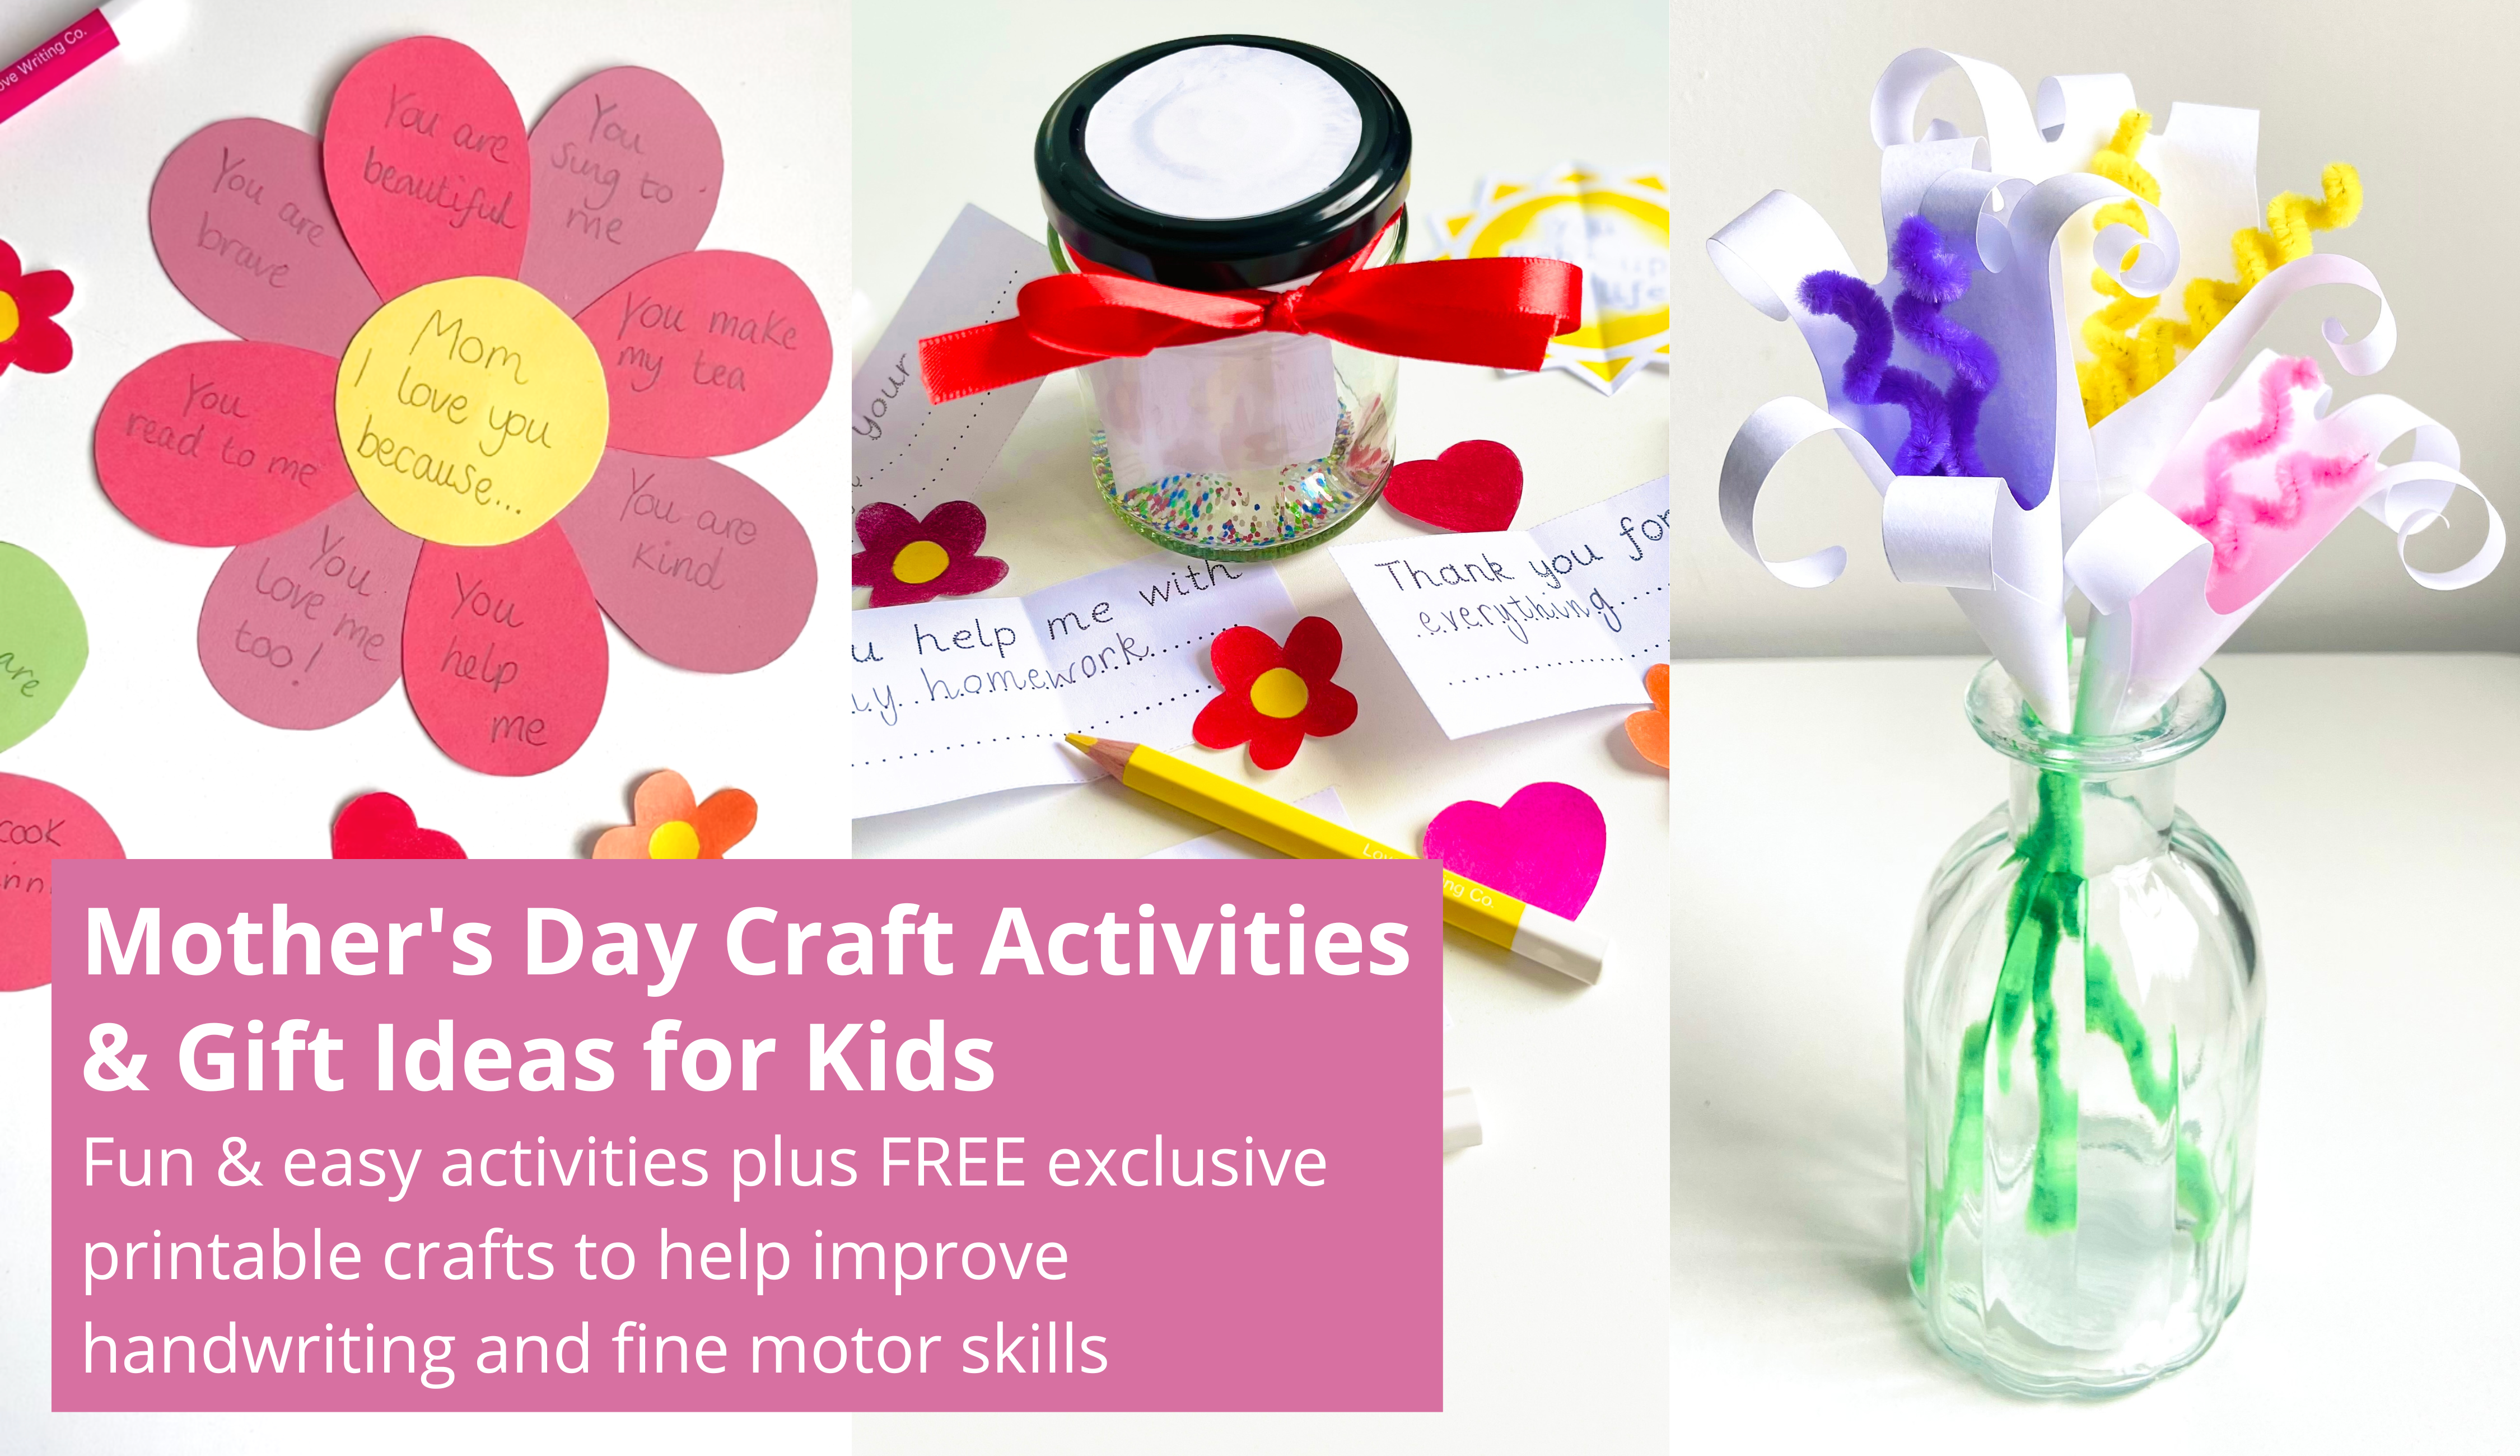 The Guide To The Perfect Mother's Day Gifts & Free Printable Crafts For  Kids – Love Writing Co.